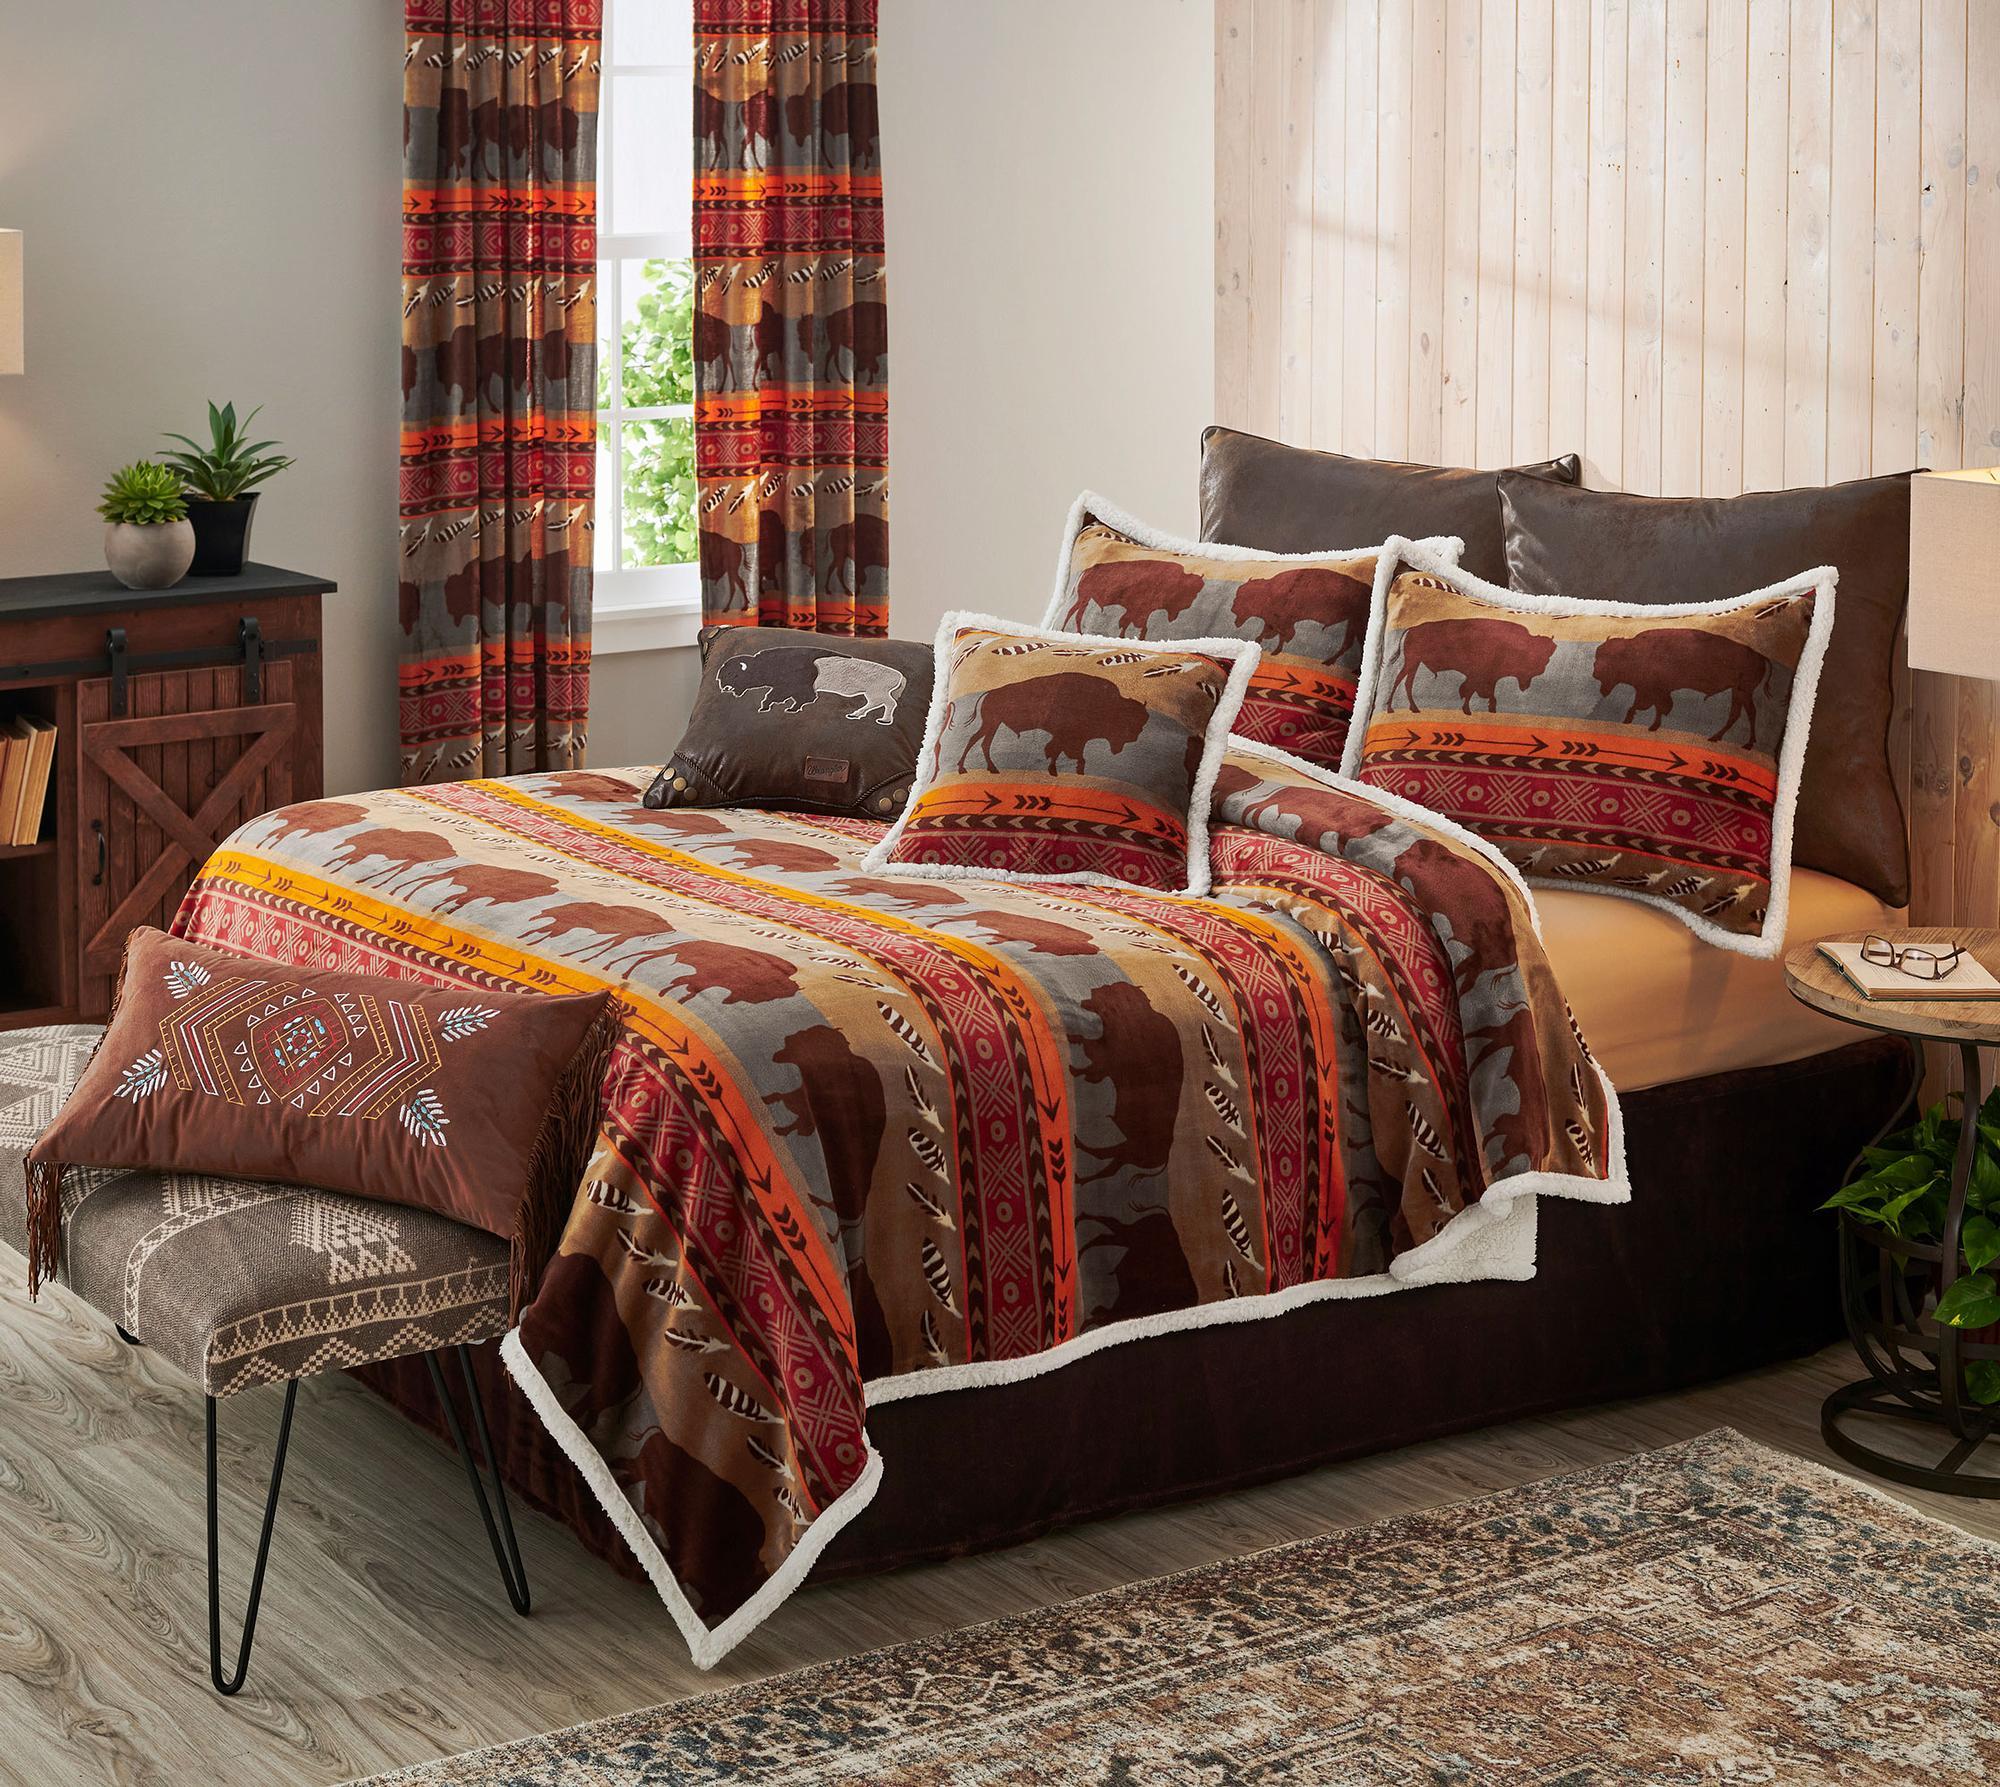 High Plains Bison Bedding Collection - Wild Wings